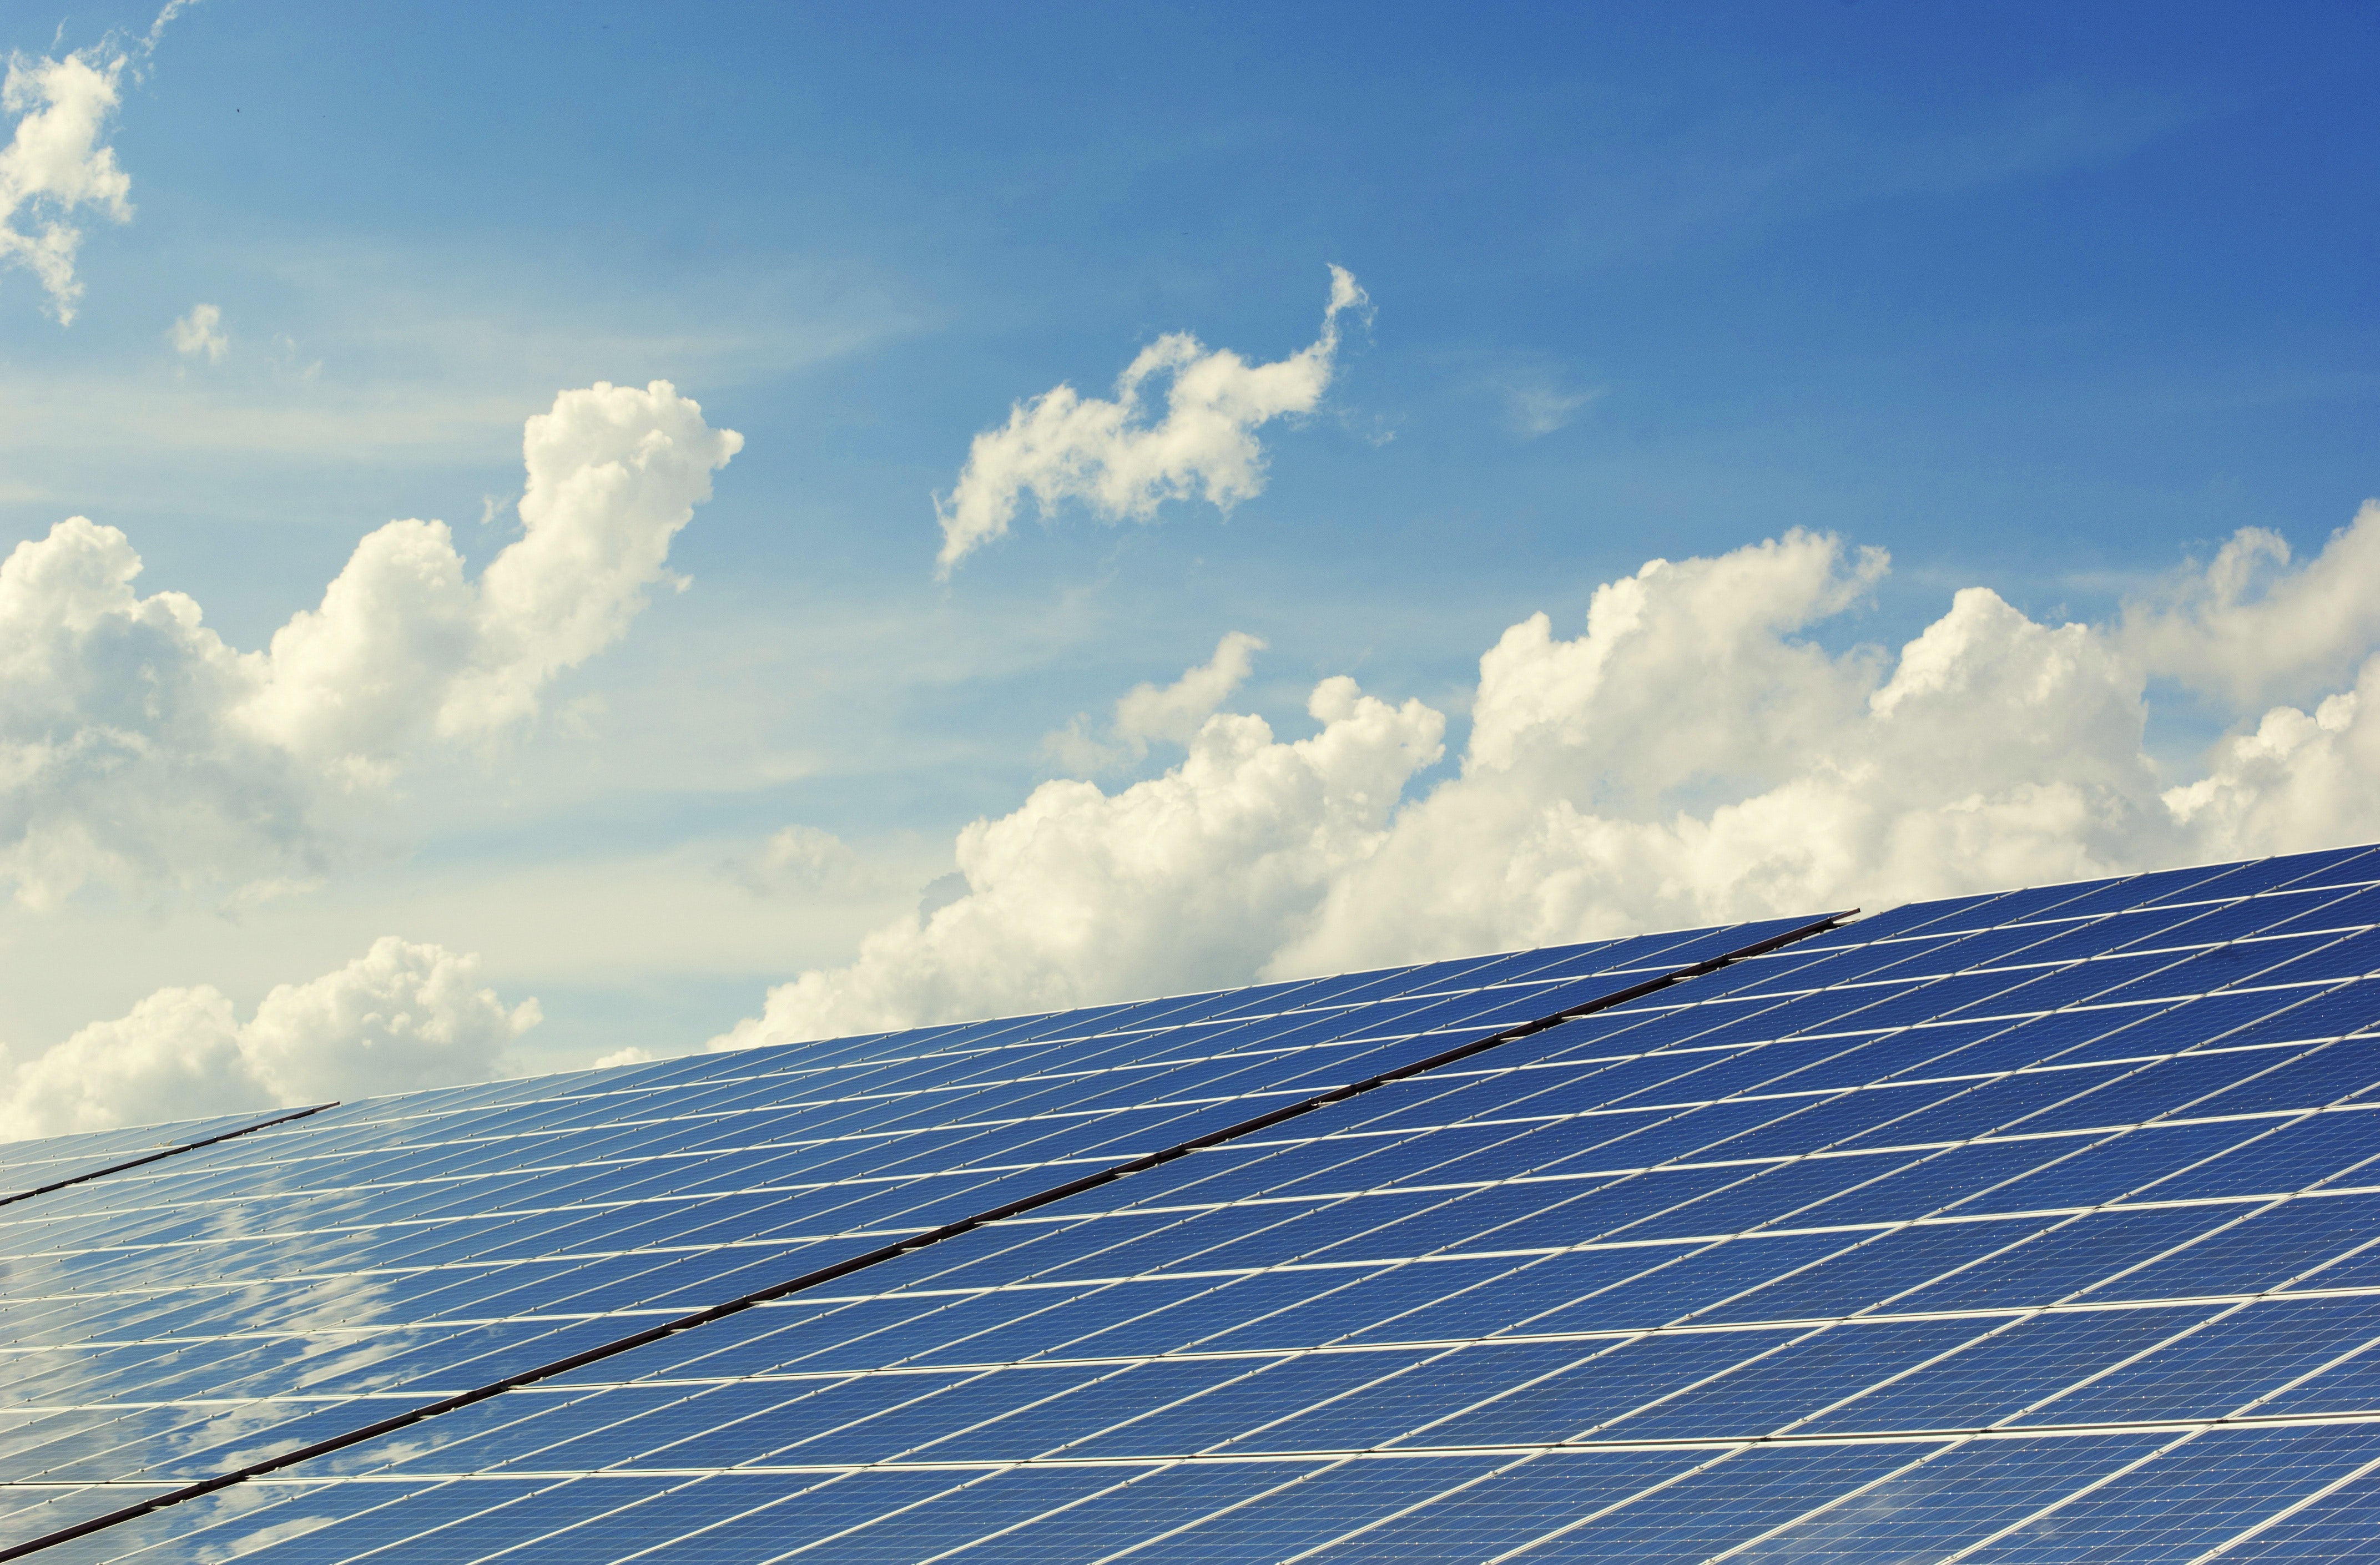 Webinar—Rooftop Solar: A Catalyst for Achieving Net-Zero Emissions